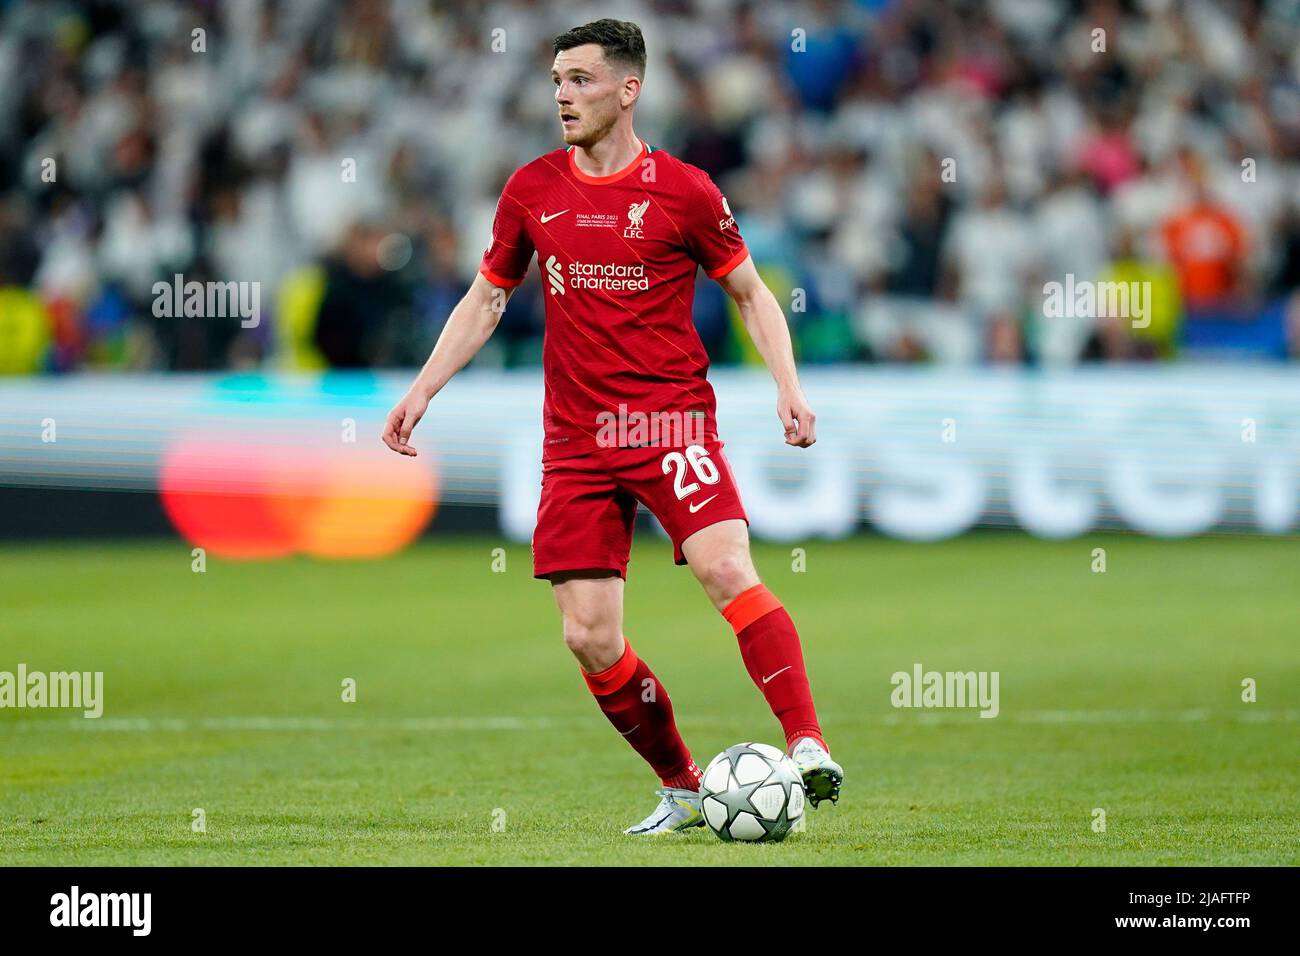 Andy Robertson of Liverpool FC during the UEFA Champions League Final match between Liverpool FC and Real Madrid played at Stade de France on May 28, 2022 in Paris, France. (Photo / Magma) Stock Photo